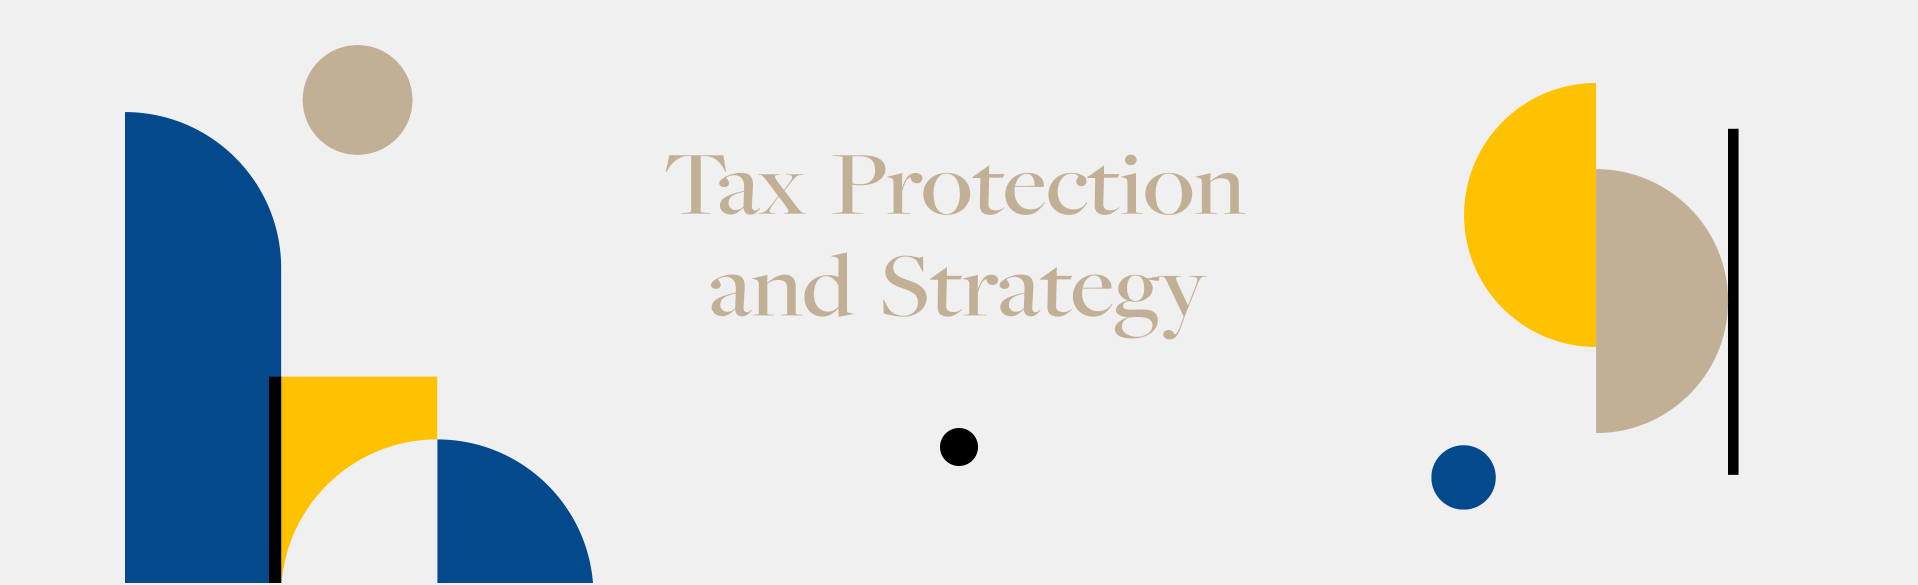 Tax protection and strategy